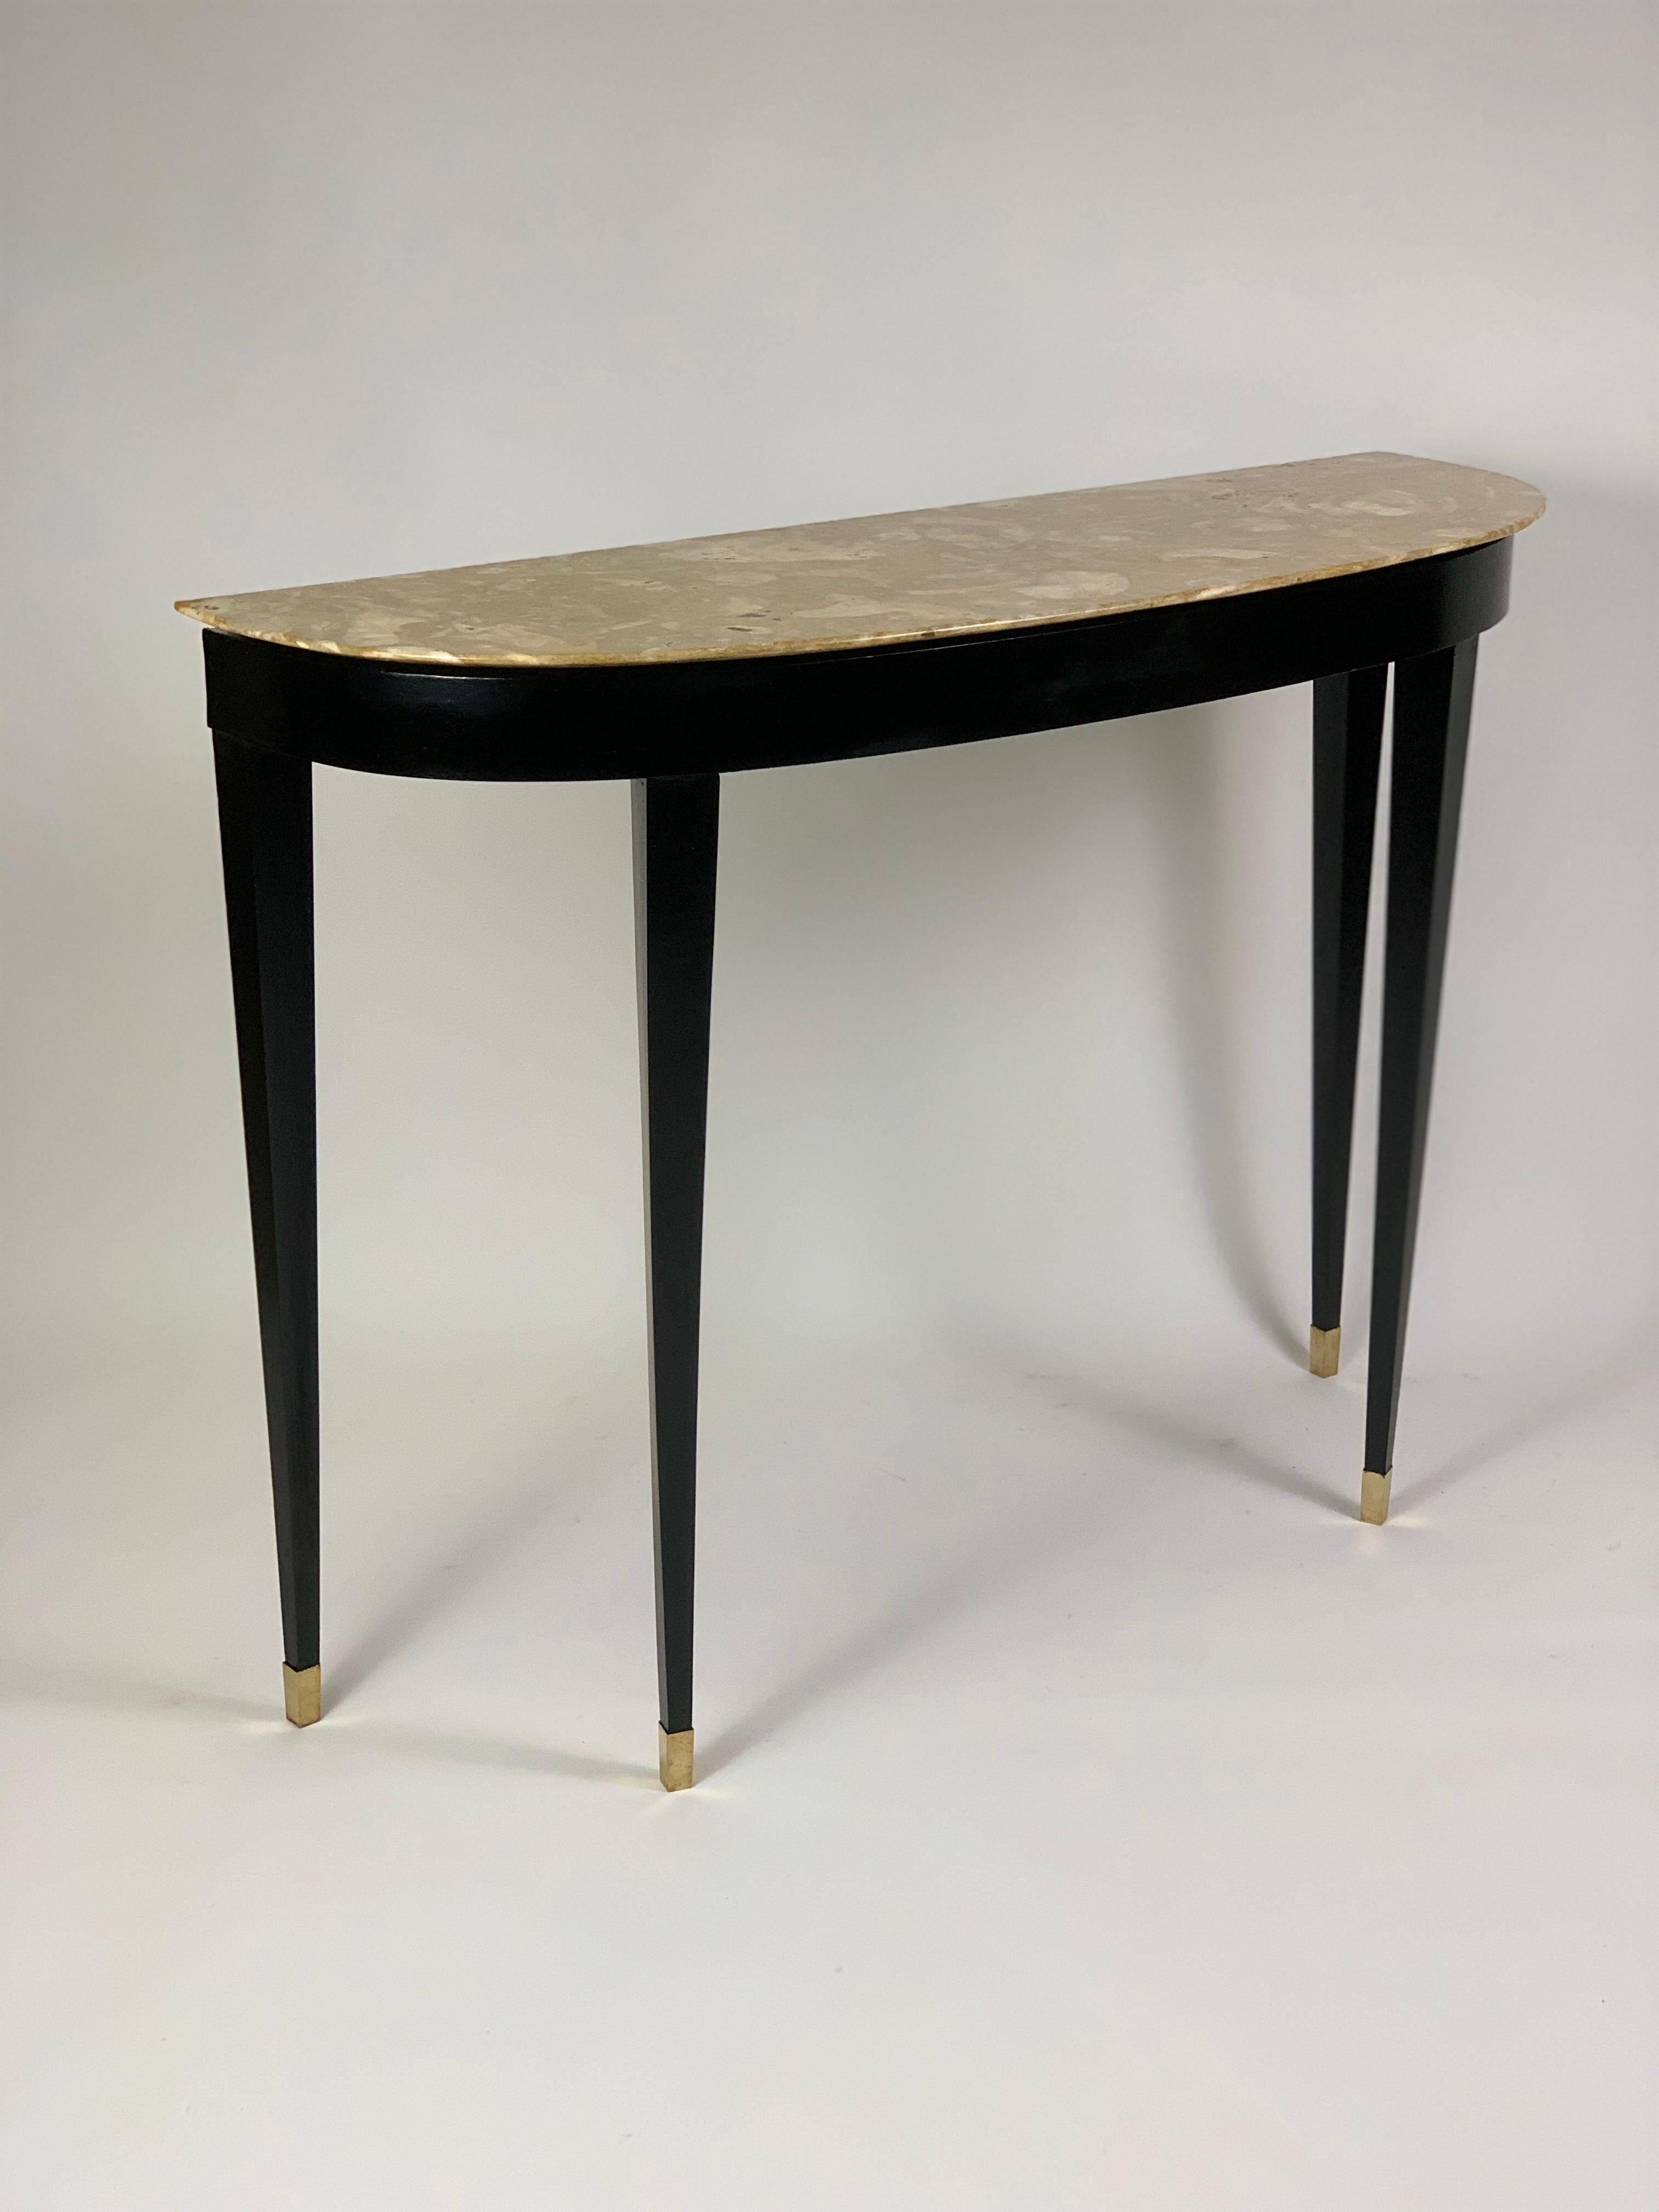 Mid Century Italian console table with four pyramidal legs supporting a semi-moon shaped top.
The console top is in beautiful variegated marble breccia with an inverted owl's beak edge.
The structure is black lacquered and the legs end at the